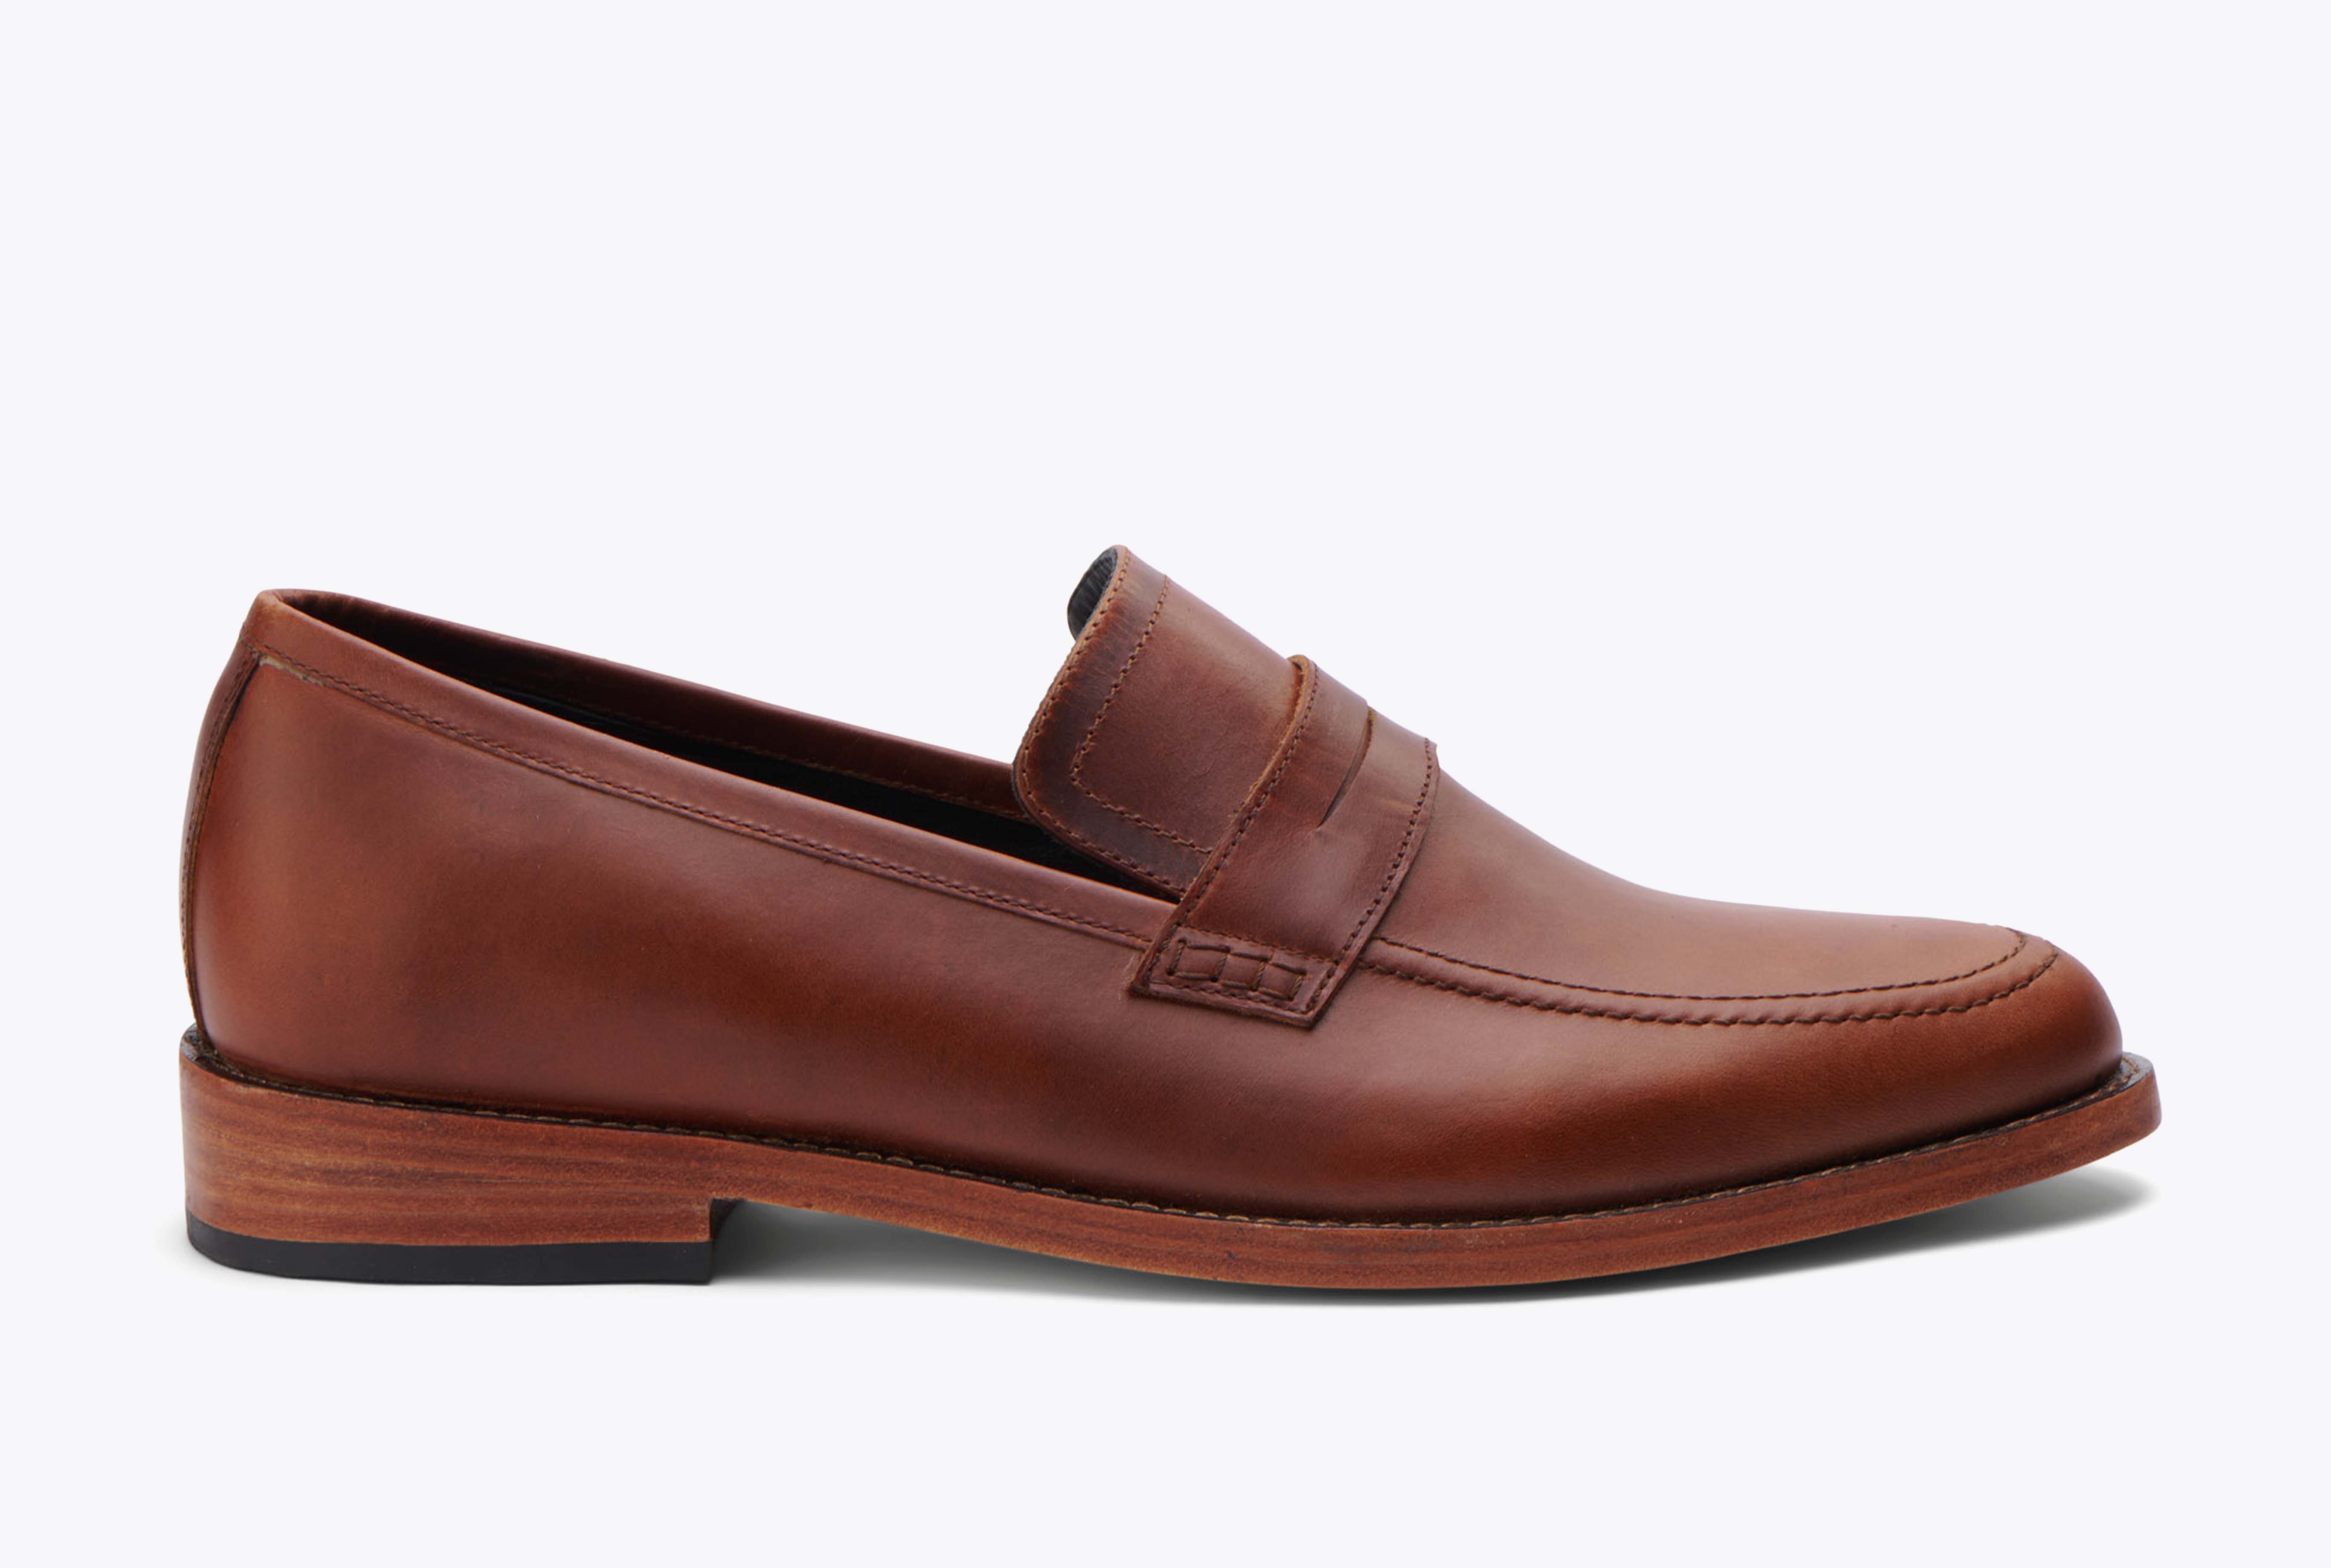 Men's Penny Loafer | Handcrafted & Ethically Made |